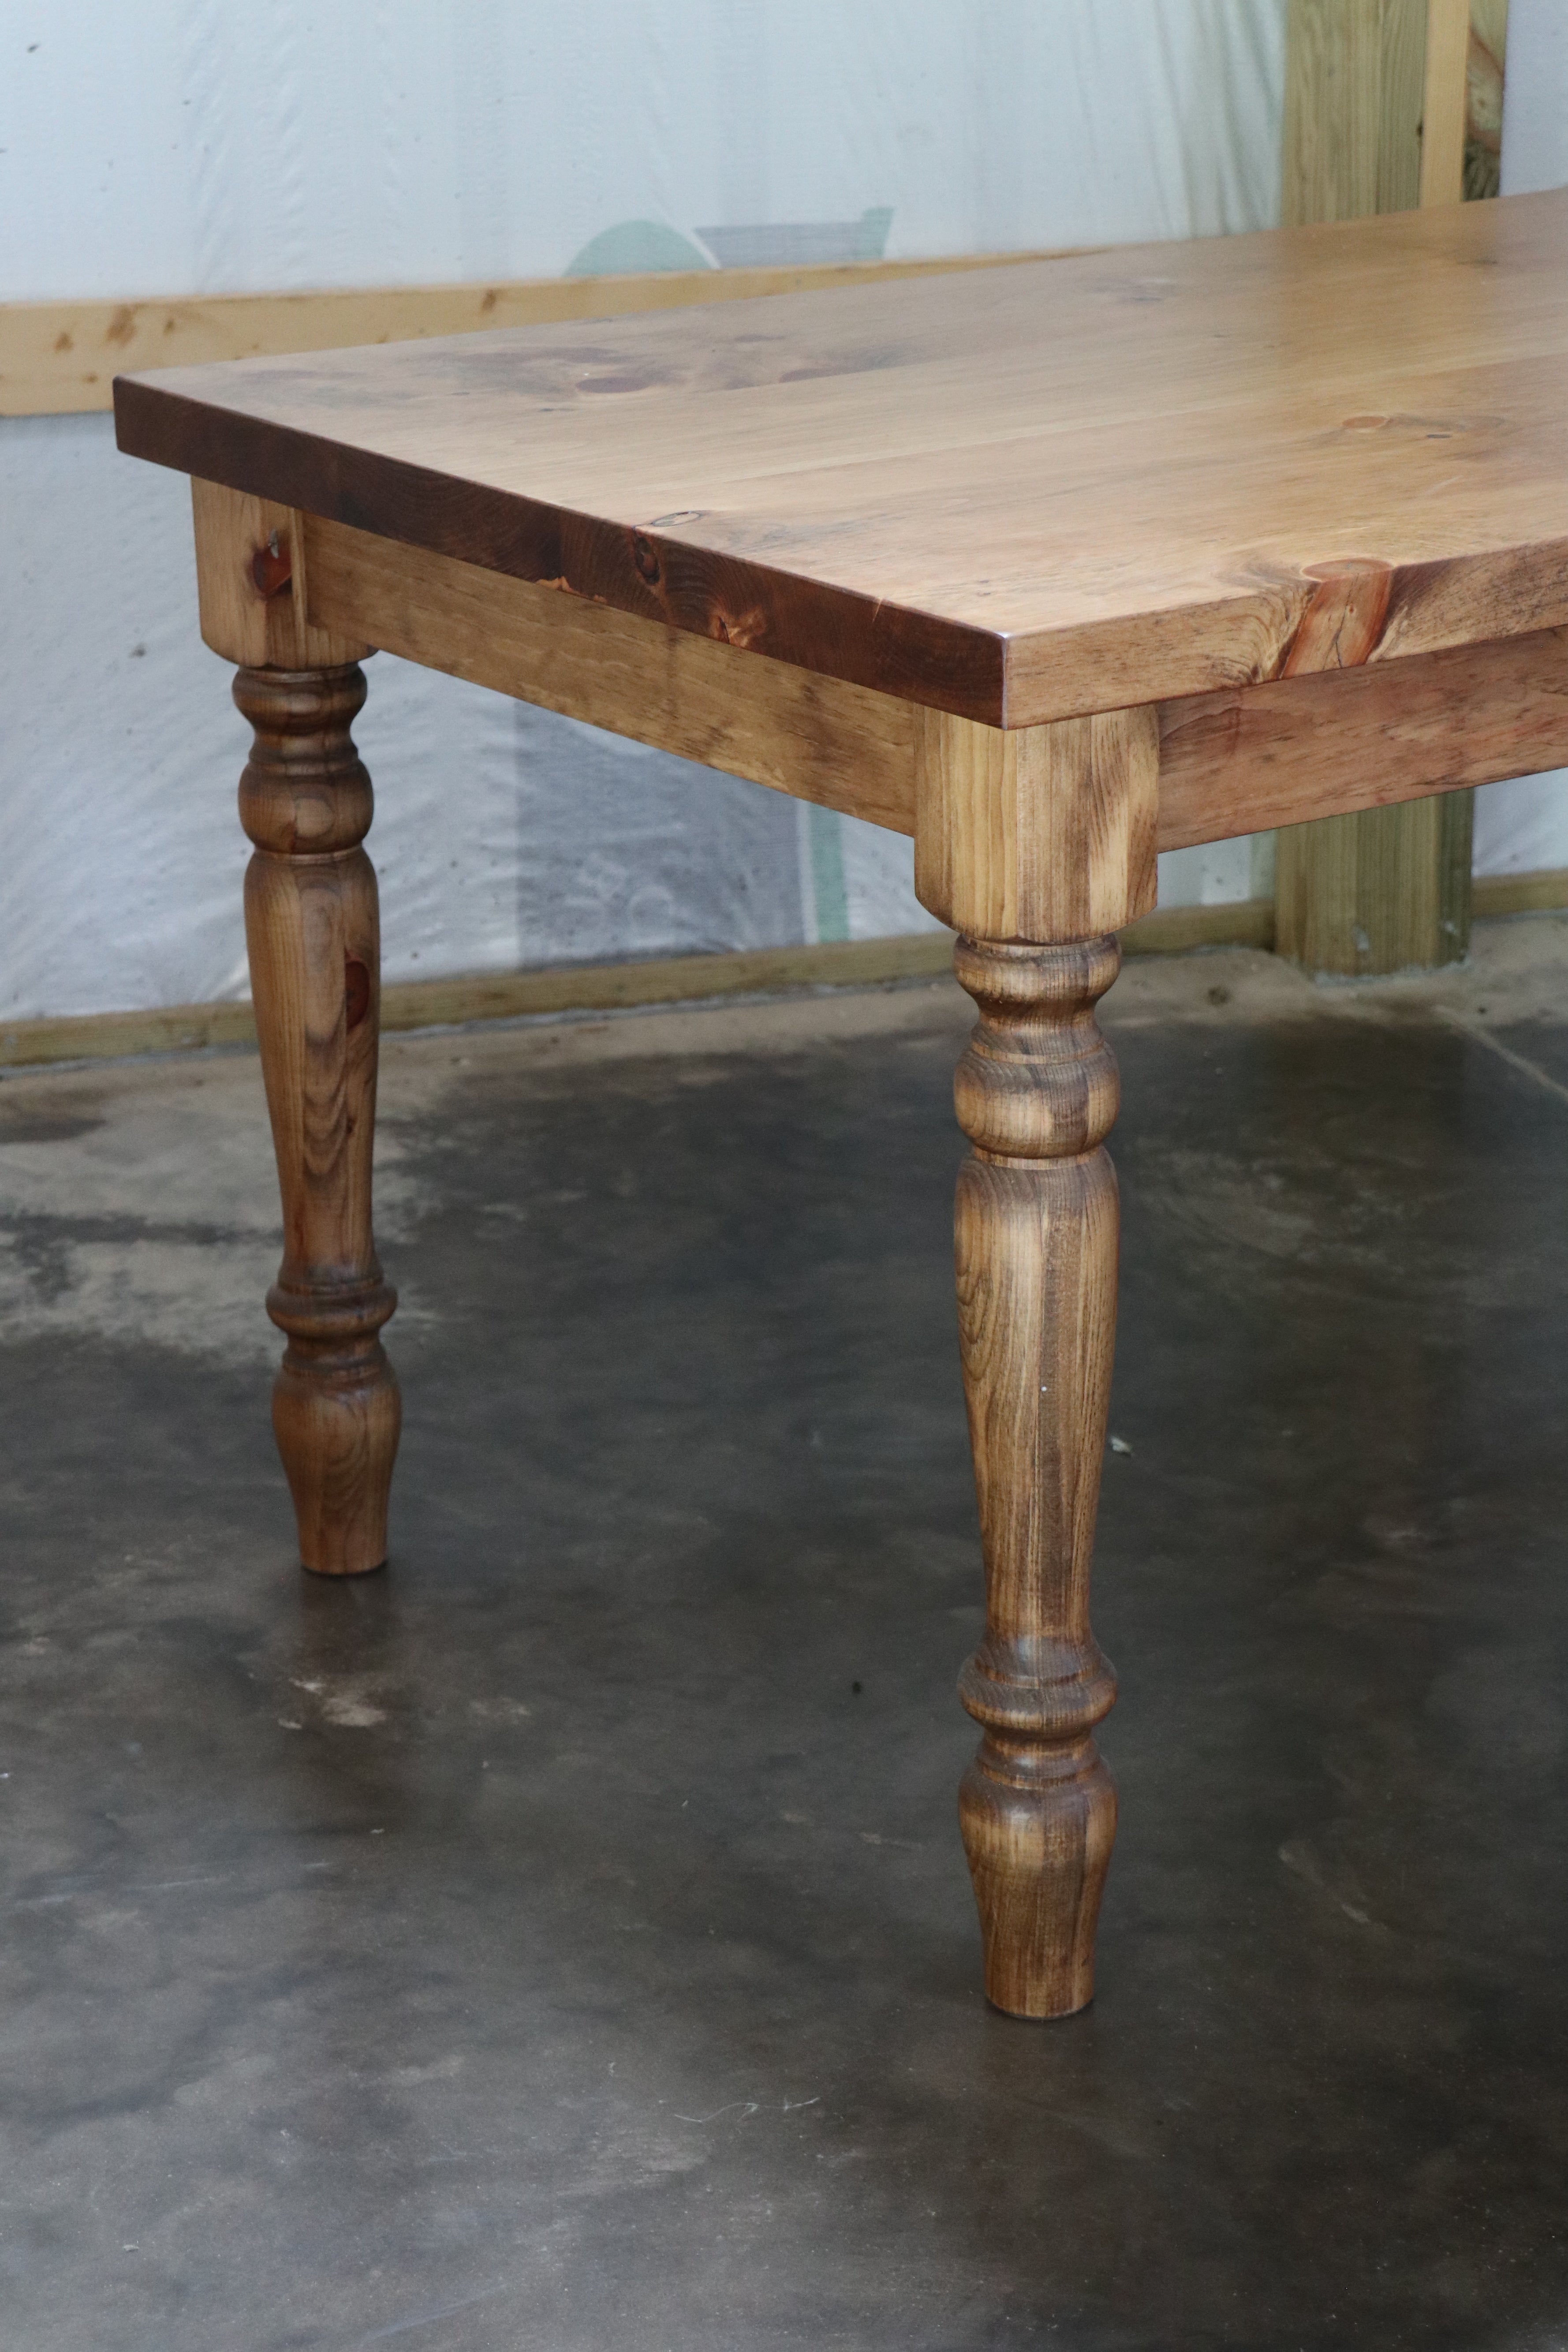 Classic Farmhouse Dining Table with Thick Top - Hazel Oak Farms Handmade Furniture in Iowa, USA